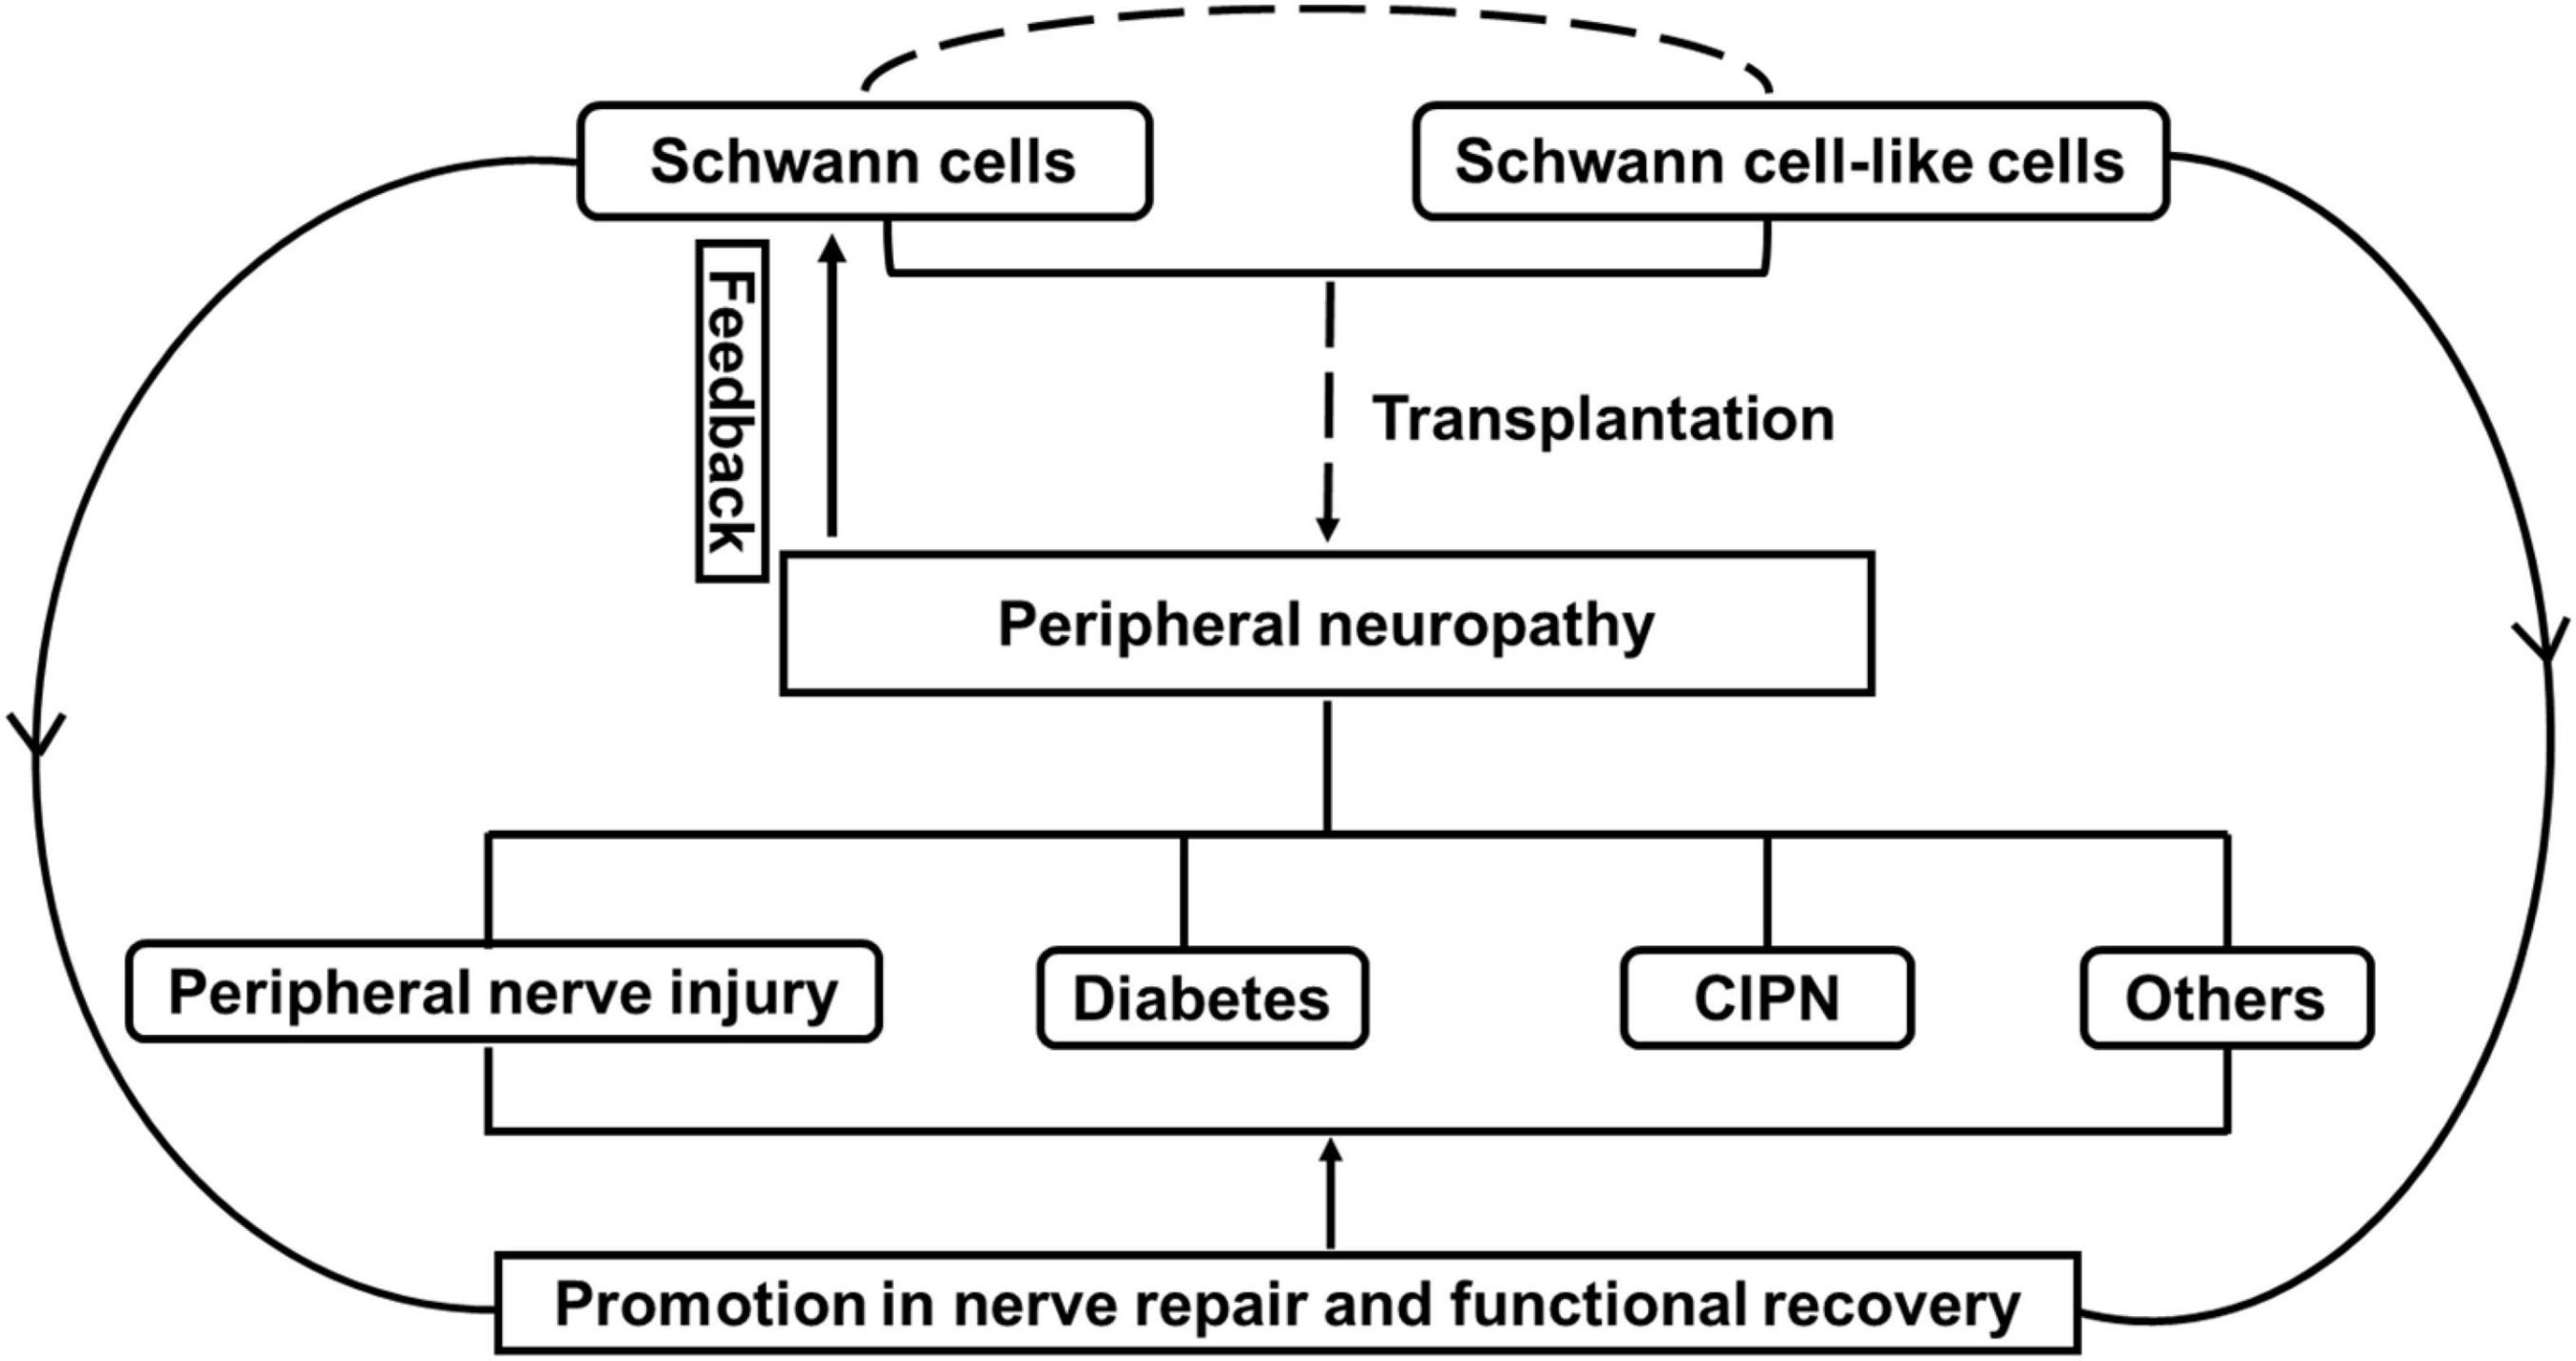 Frontiers | The Effect of Schwann Cells/Schwann Cell-Like Cells on Cell  Therapy for Peripheral Neuropathy